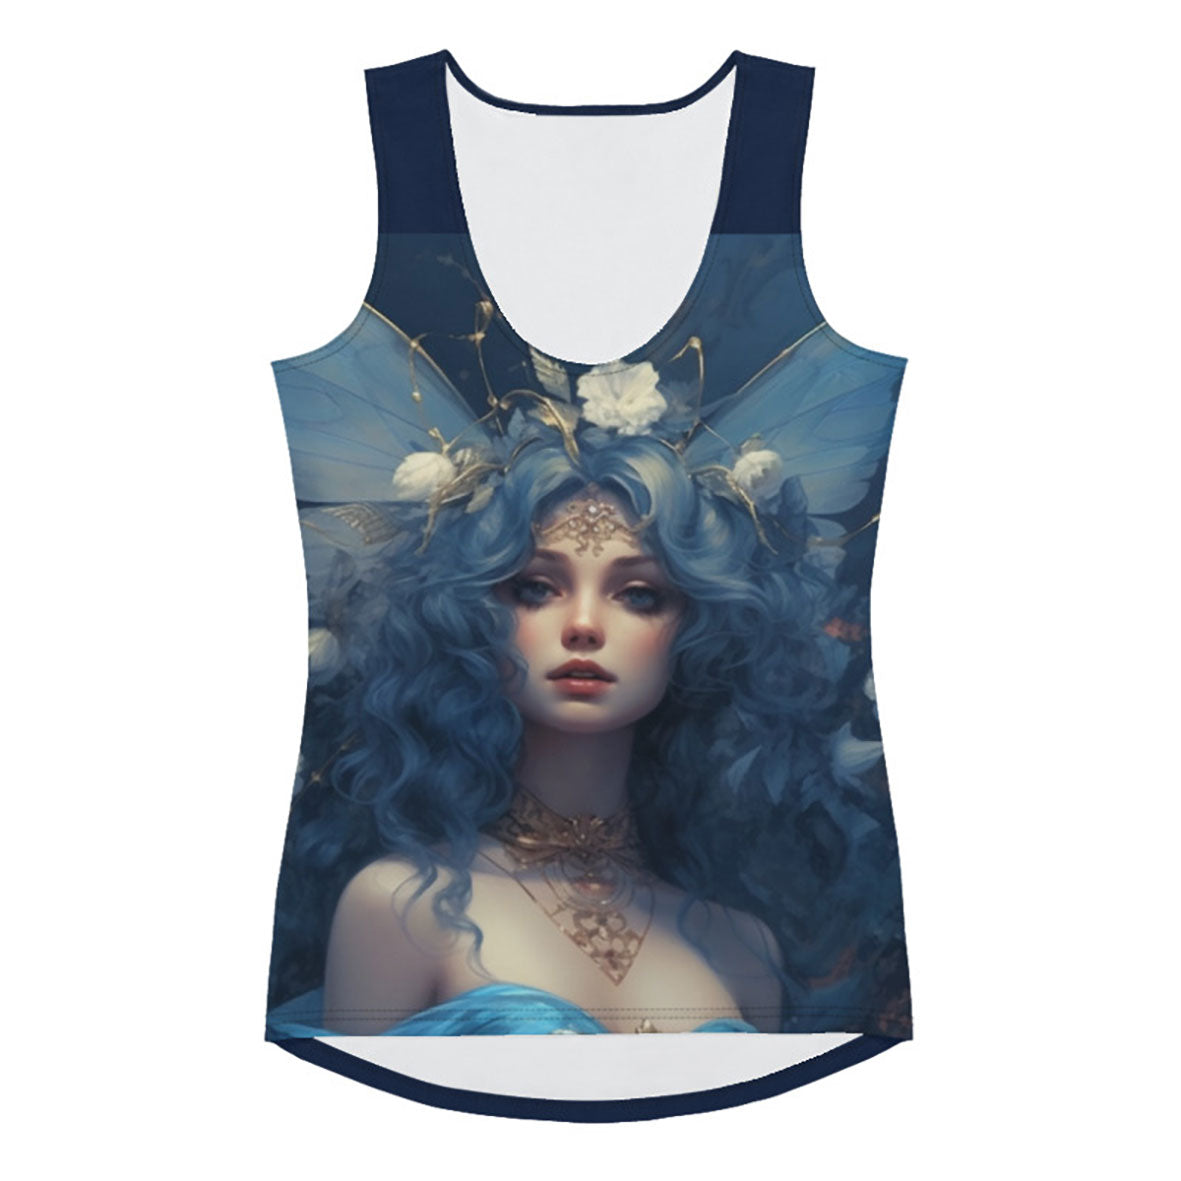 Captivate and Charm: Step into a World of Wonder with Our French Fairy Tank Top!